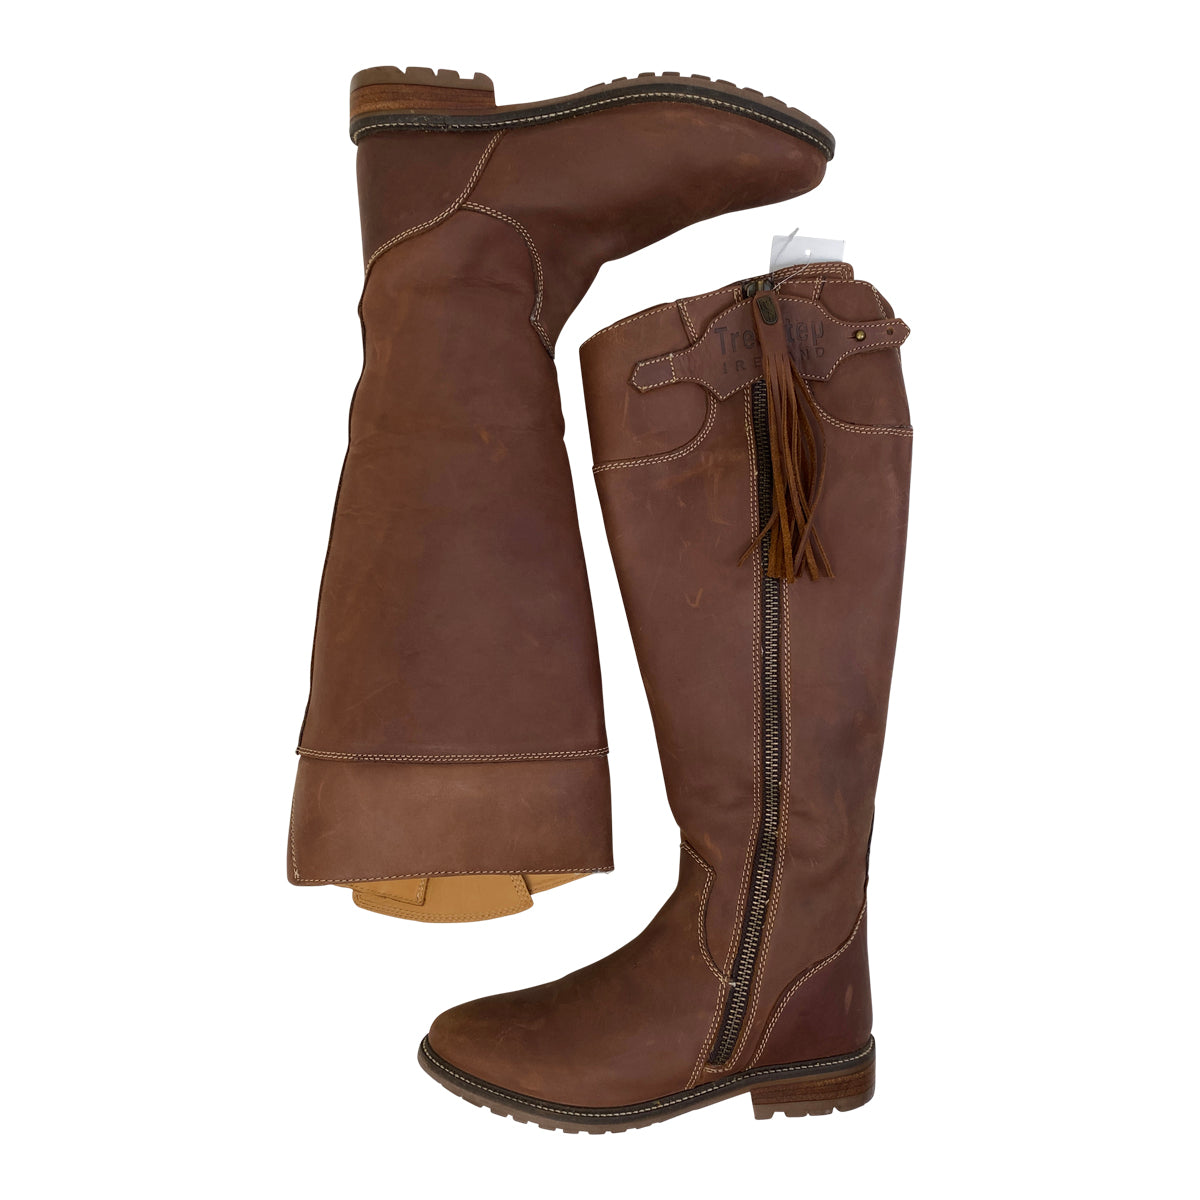 Tredstep 'Shannon' H2O Country Boots in Mahogany